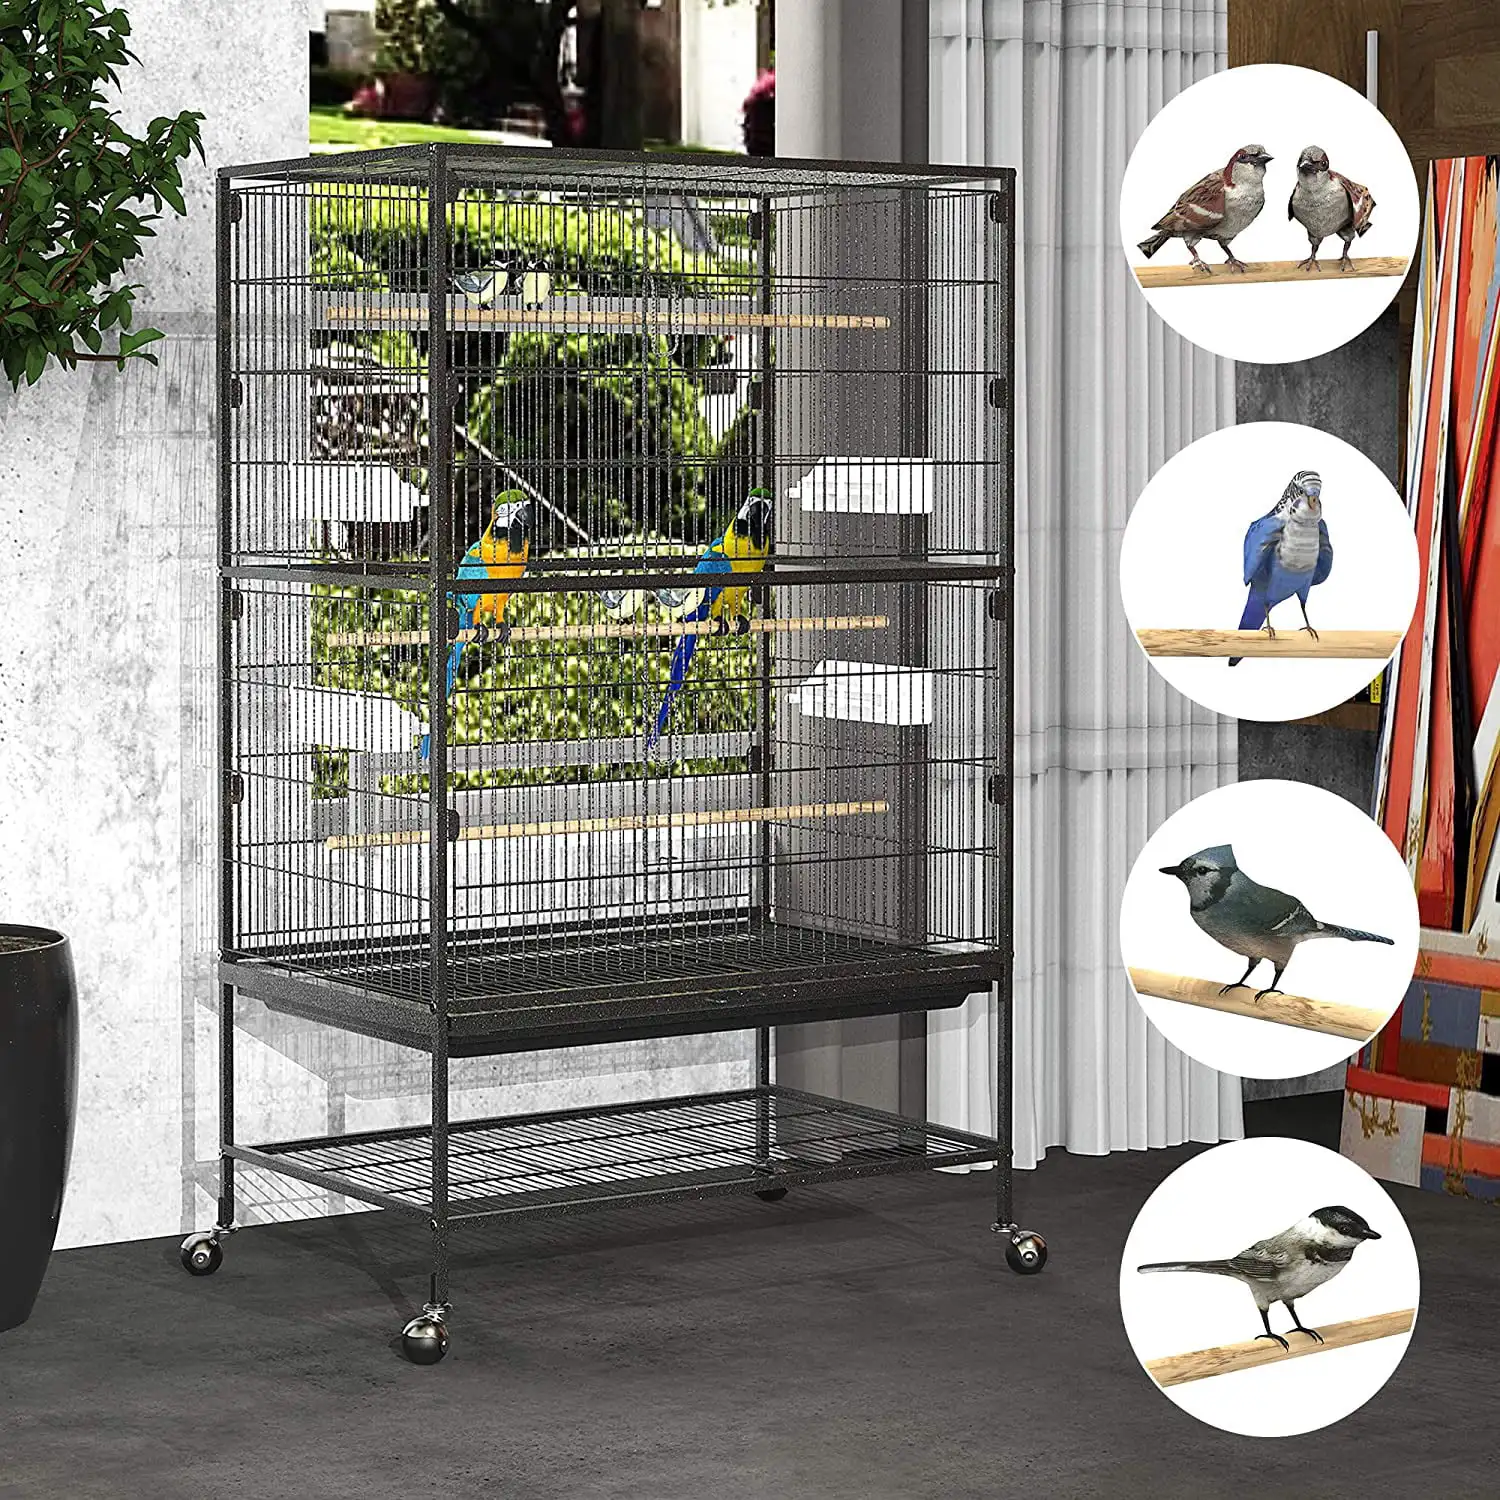 

Large Rolling Metal Bird 52" Parakeet Parrot Cage,Wrought Iron Flight with Stand for Large Cockatiel, Canary, Pigeons,